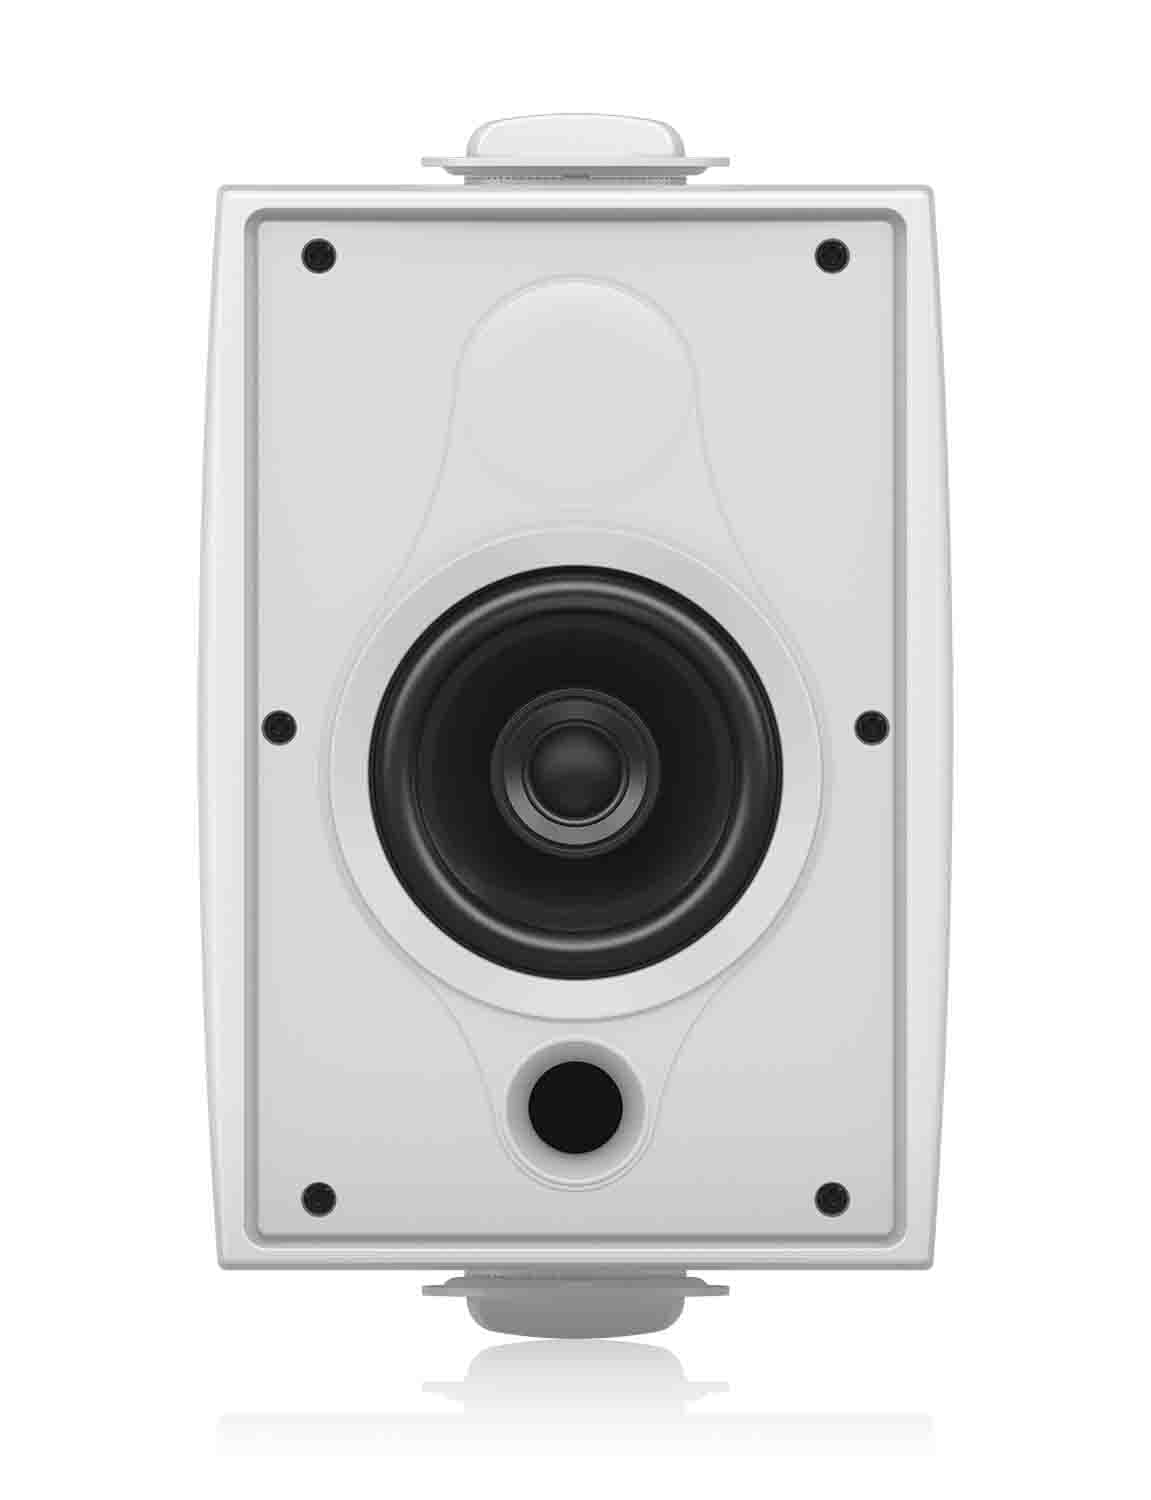 Tannoy DVS 4T-WH, 4-Inch Coaxial Surface-Mount Loudspeaker with Transformer for Installation Applications - White - Hollywood DJ